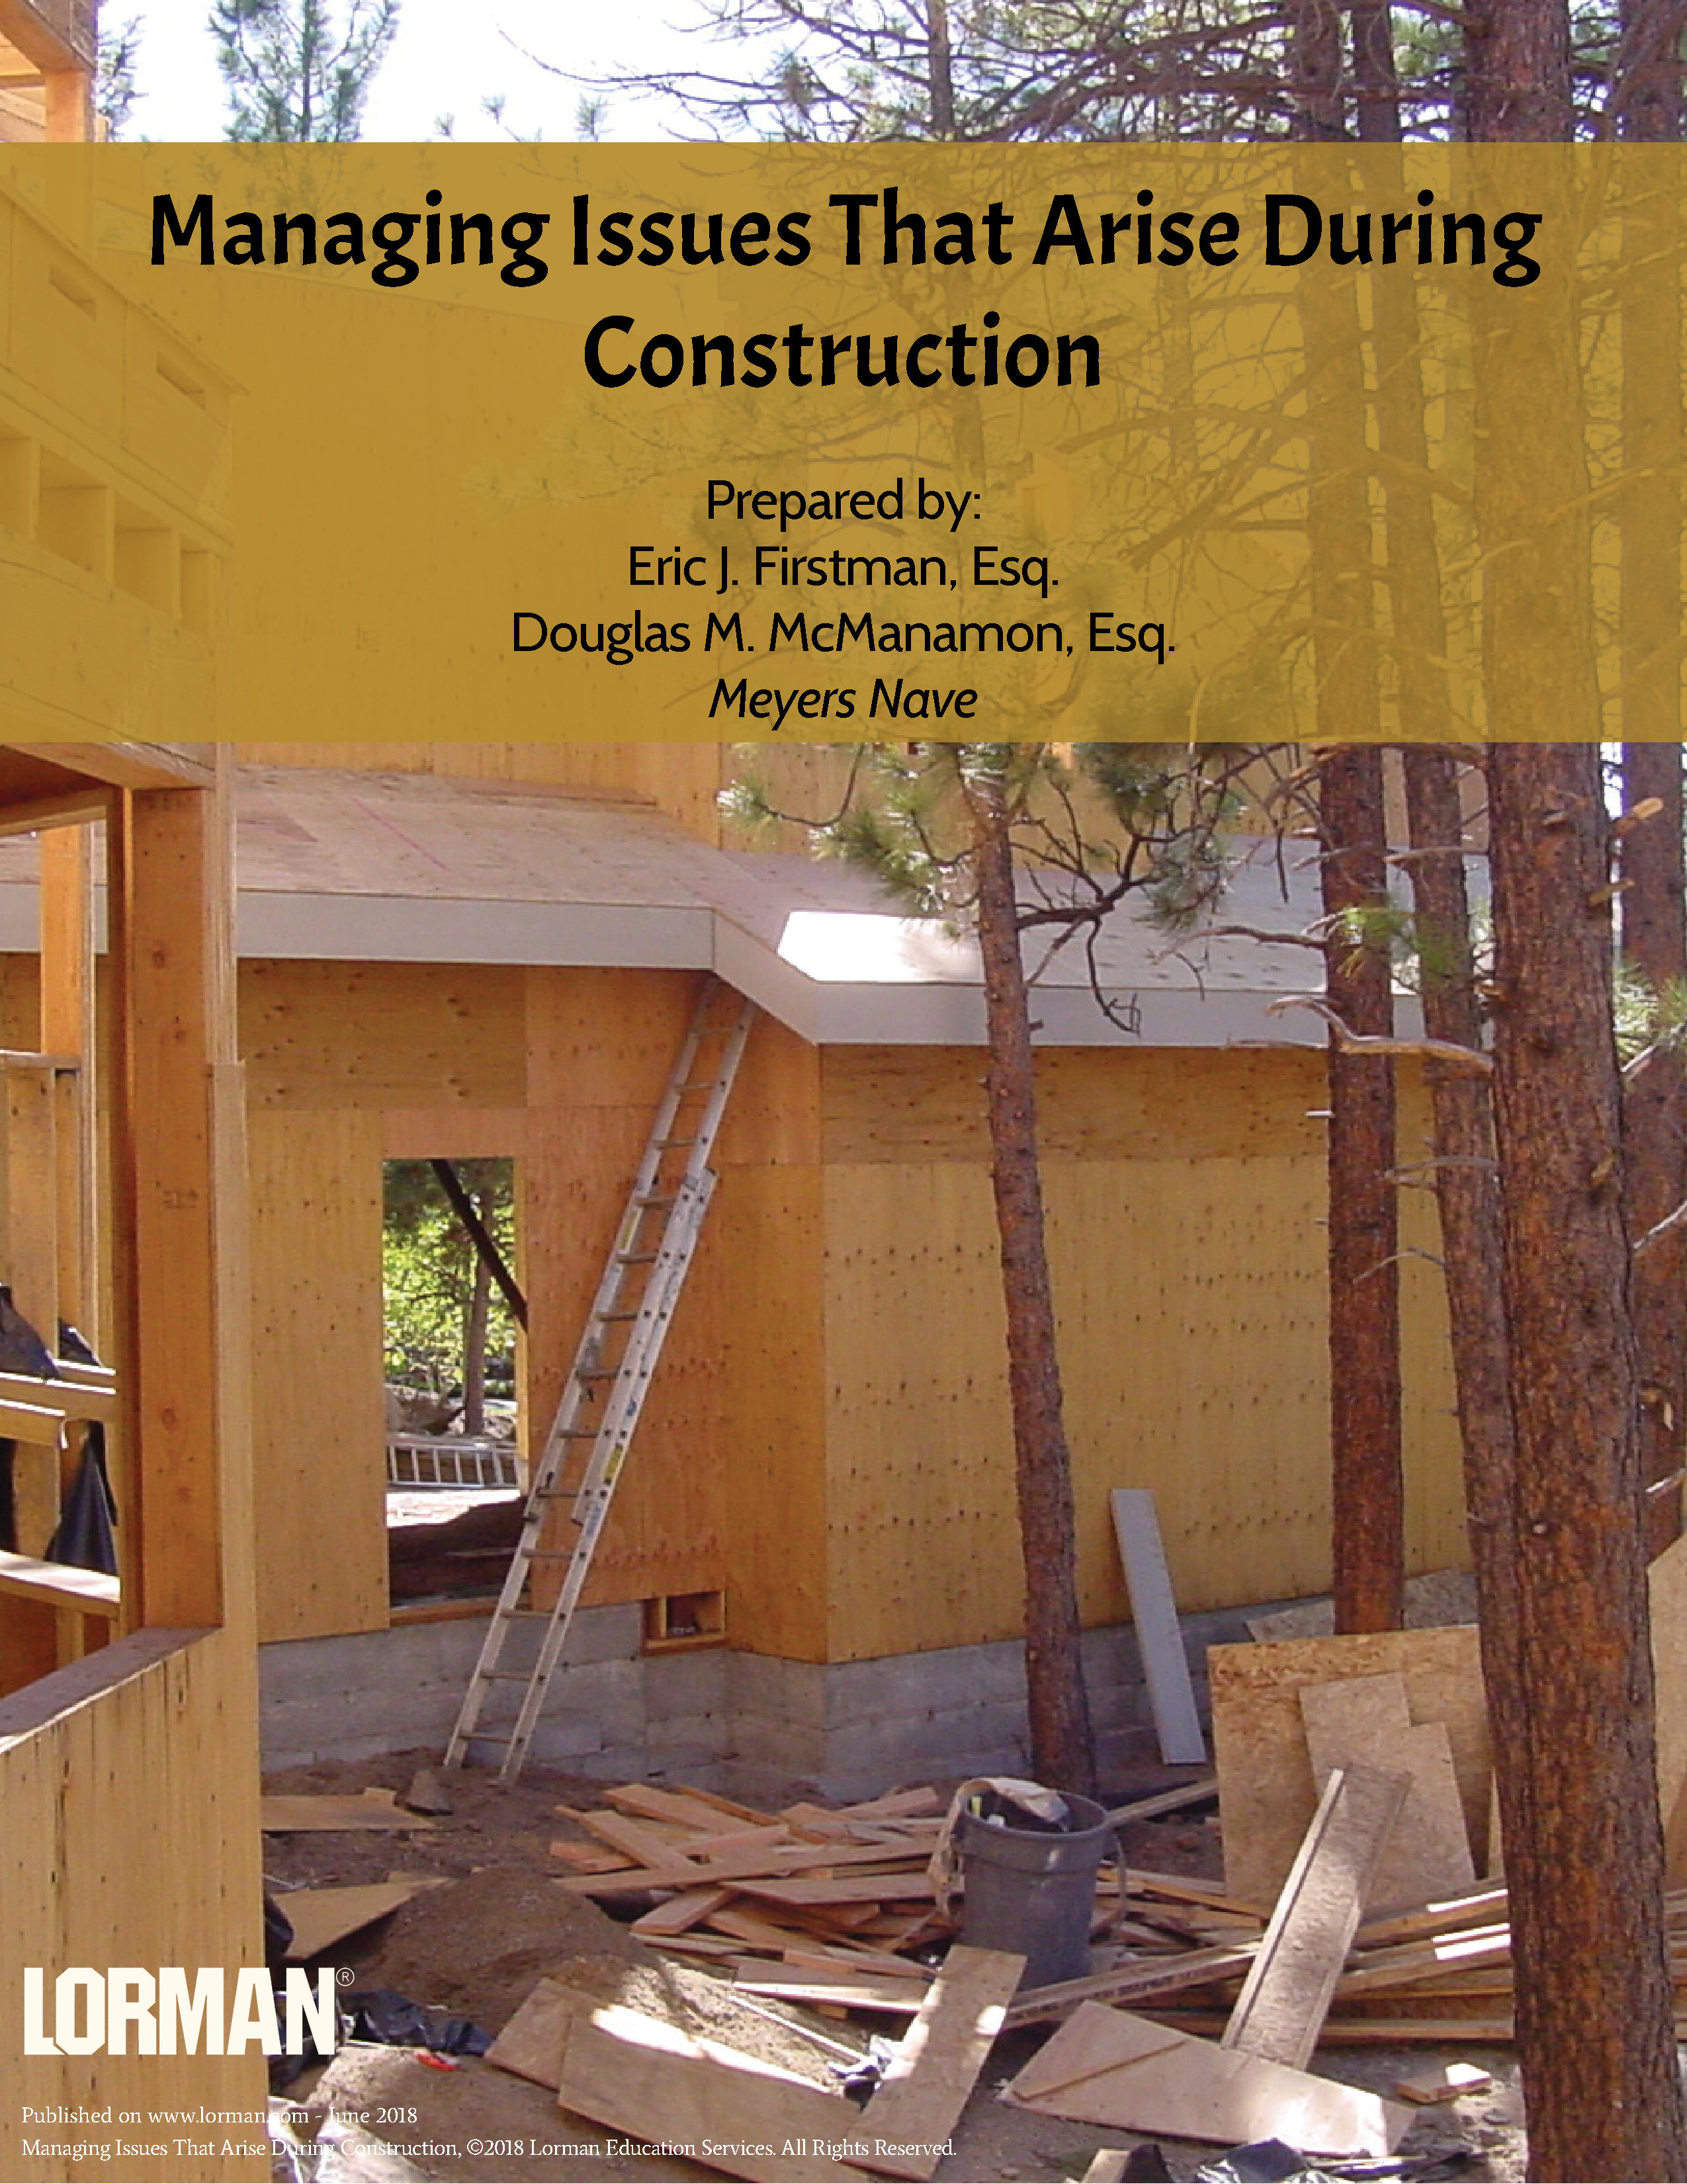 Managing Issues That Arise During Construction